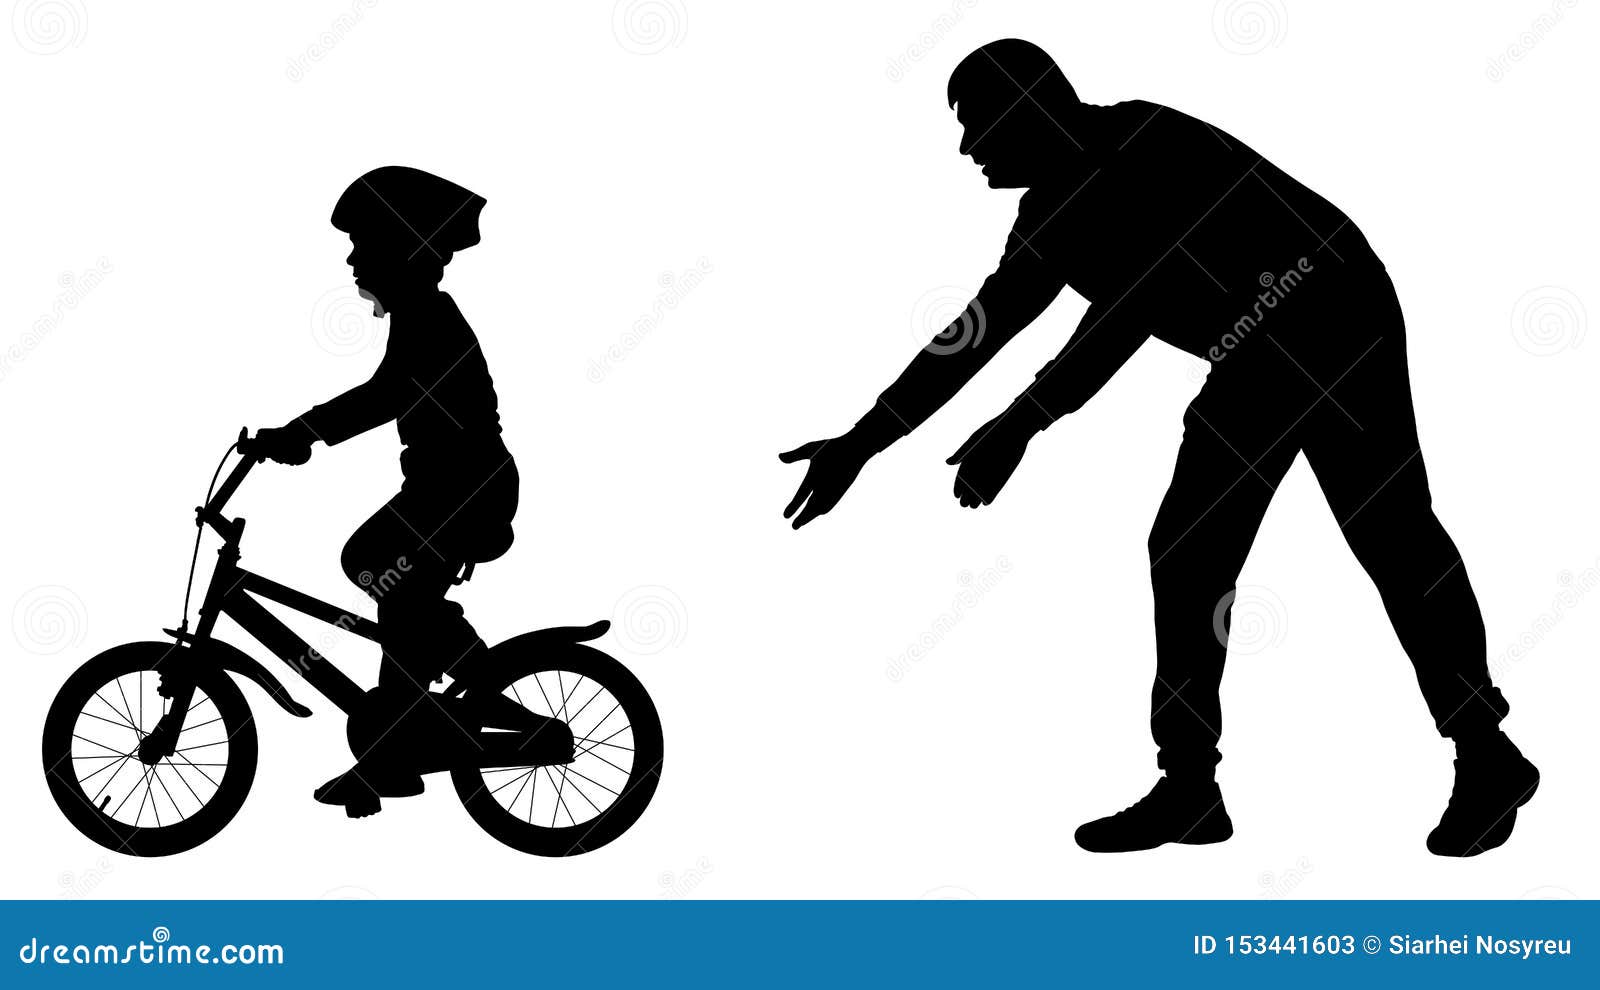 how to teach kid to ride bike without stabilisers